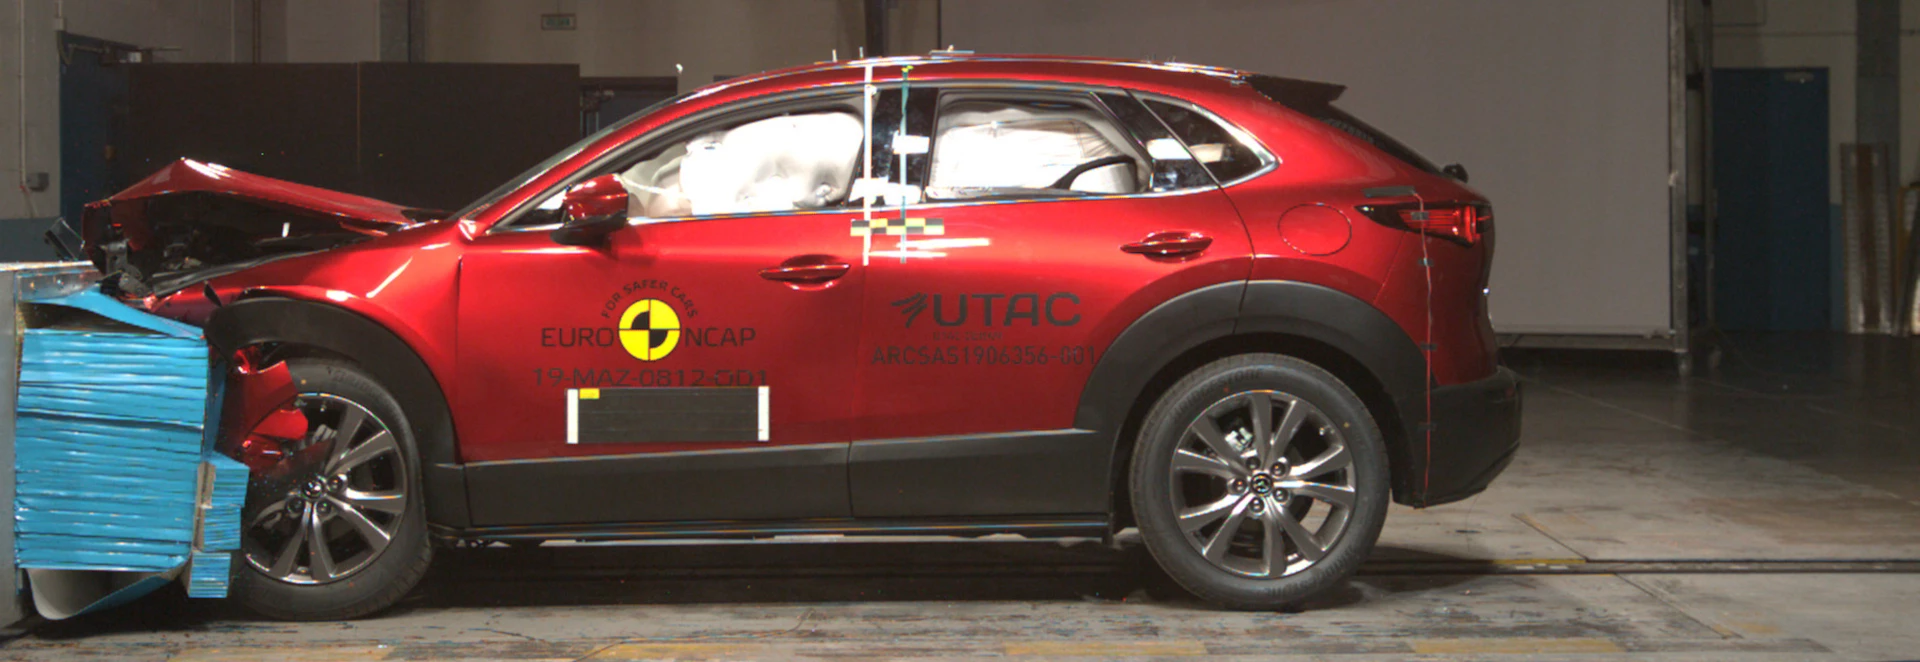 2020 Mazda CX-30 named as one of the safest cars ever by Euro NCAP